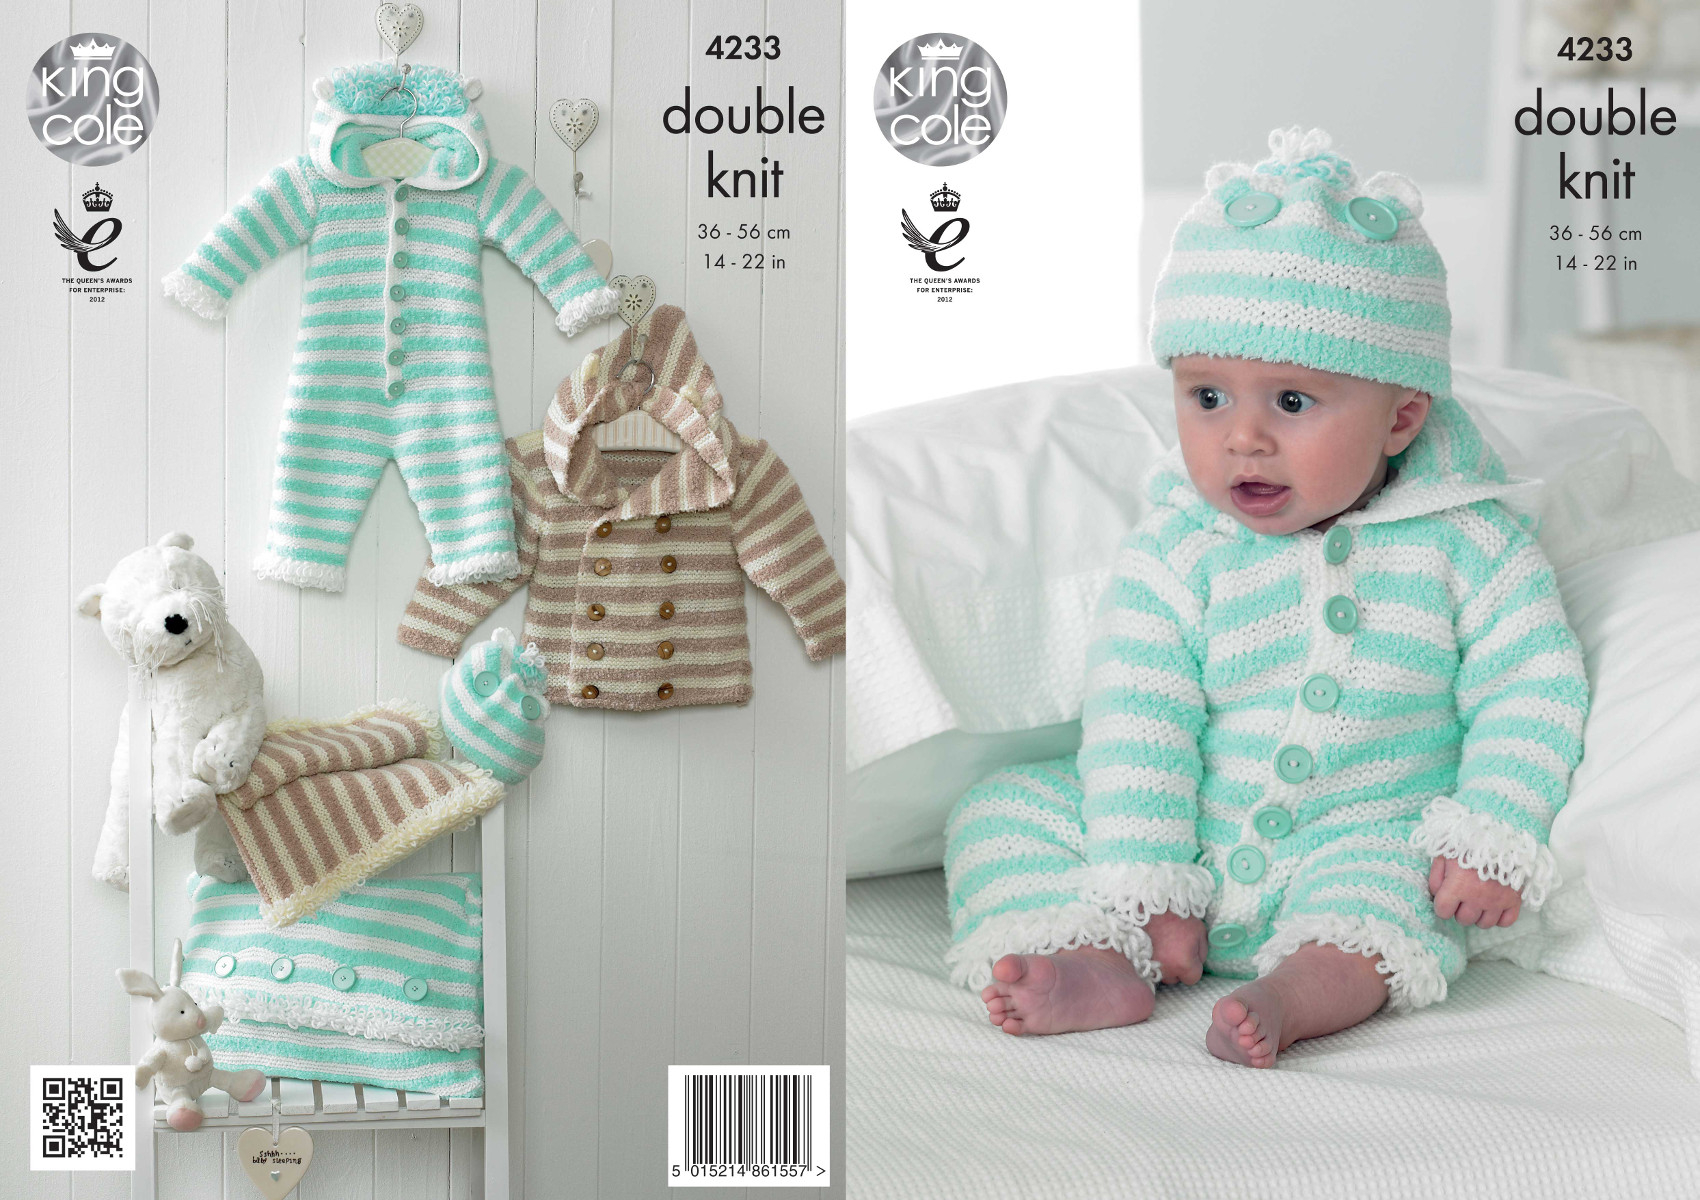 Baby Girl Blanket Knitting Patterns Details About Ba Knitting Pattern King Cole Dk Jumpsuit Coat Hat Blanket Cushion Cover 4233